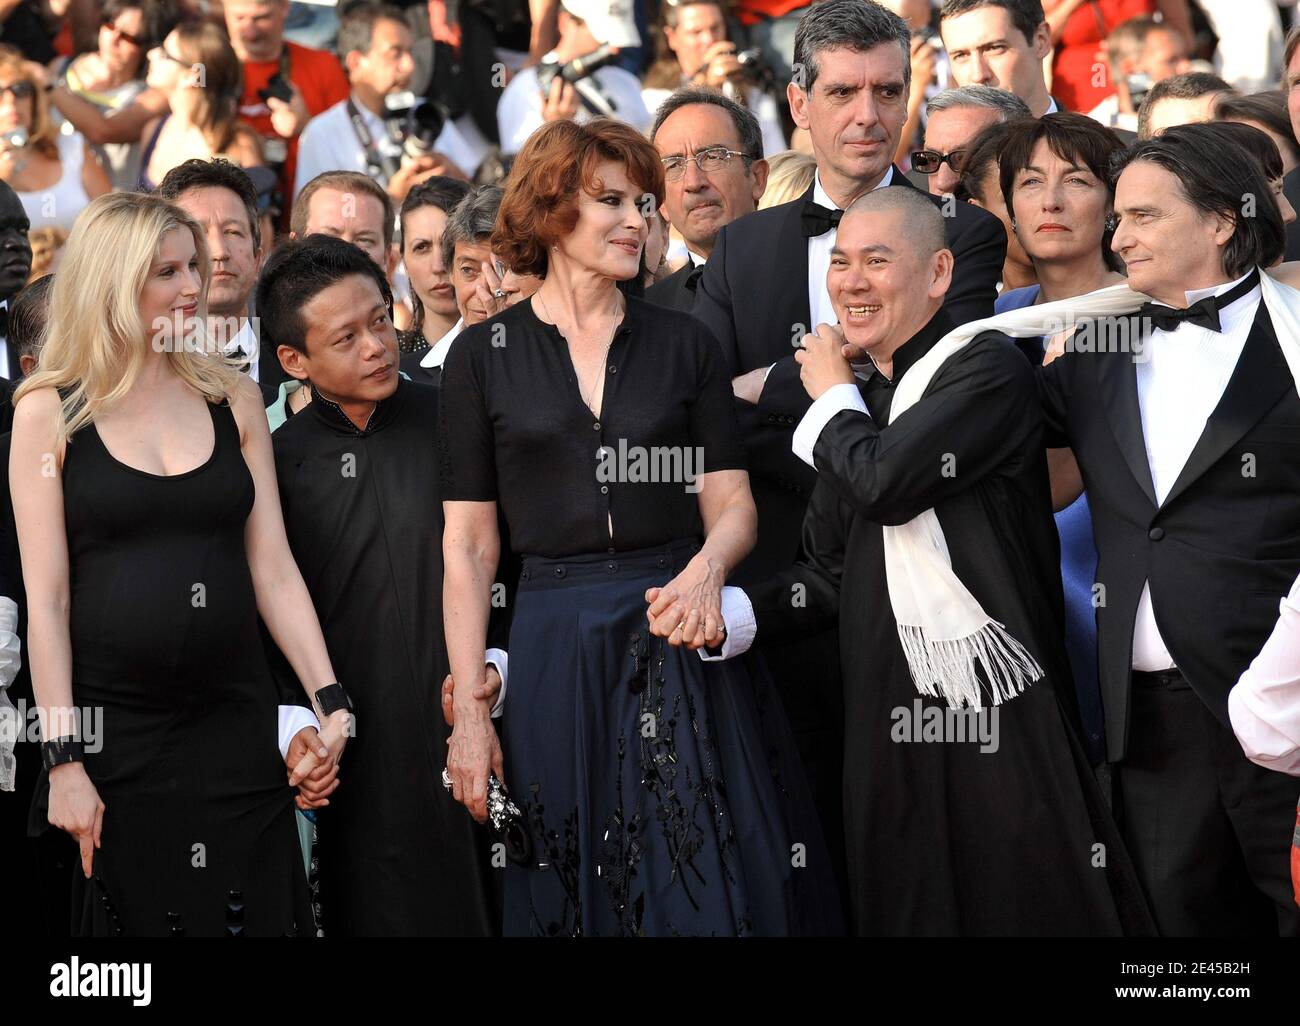 Actors Yi-Ching Lu, Jean-Pierre Leaud, director Ming-liang Tsai, actors Fanny Ardant, Kang-sheng Lee and Laetitia Casta attending the screening of 'Face' (Visage) during the 62nd Cannes Film Festival at the Palais des Festivals in Cannes, France on May 23, 2009. Photo by Nebinger-Orban/ABACAPRESS.COM Stock Photo